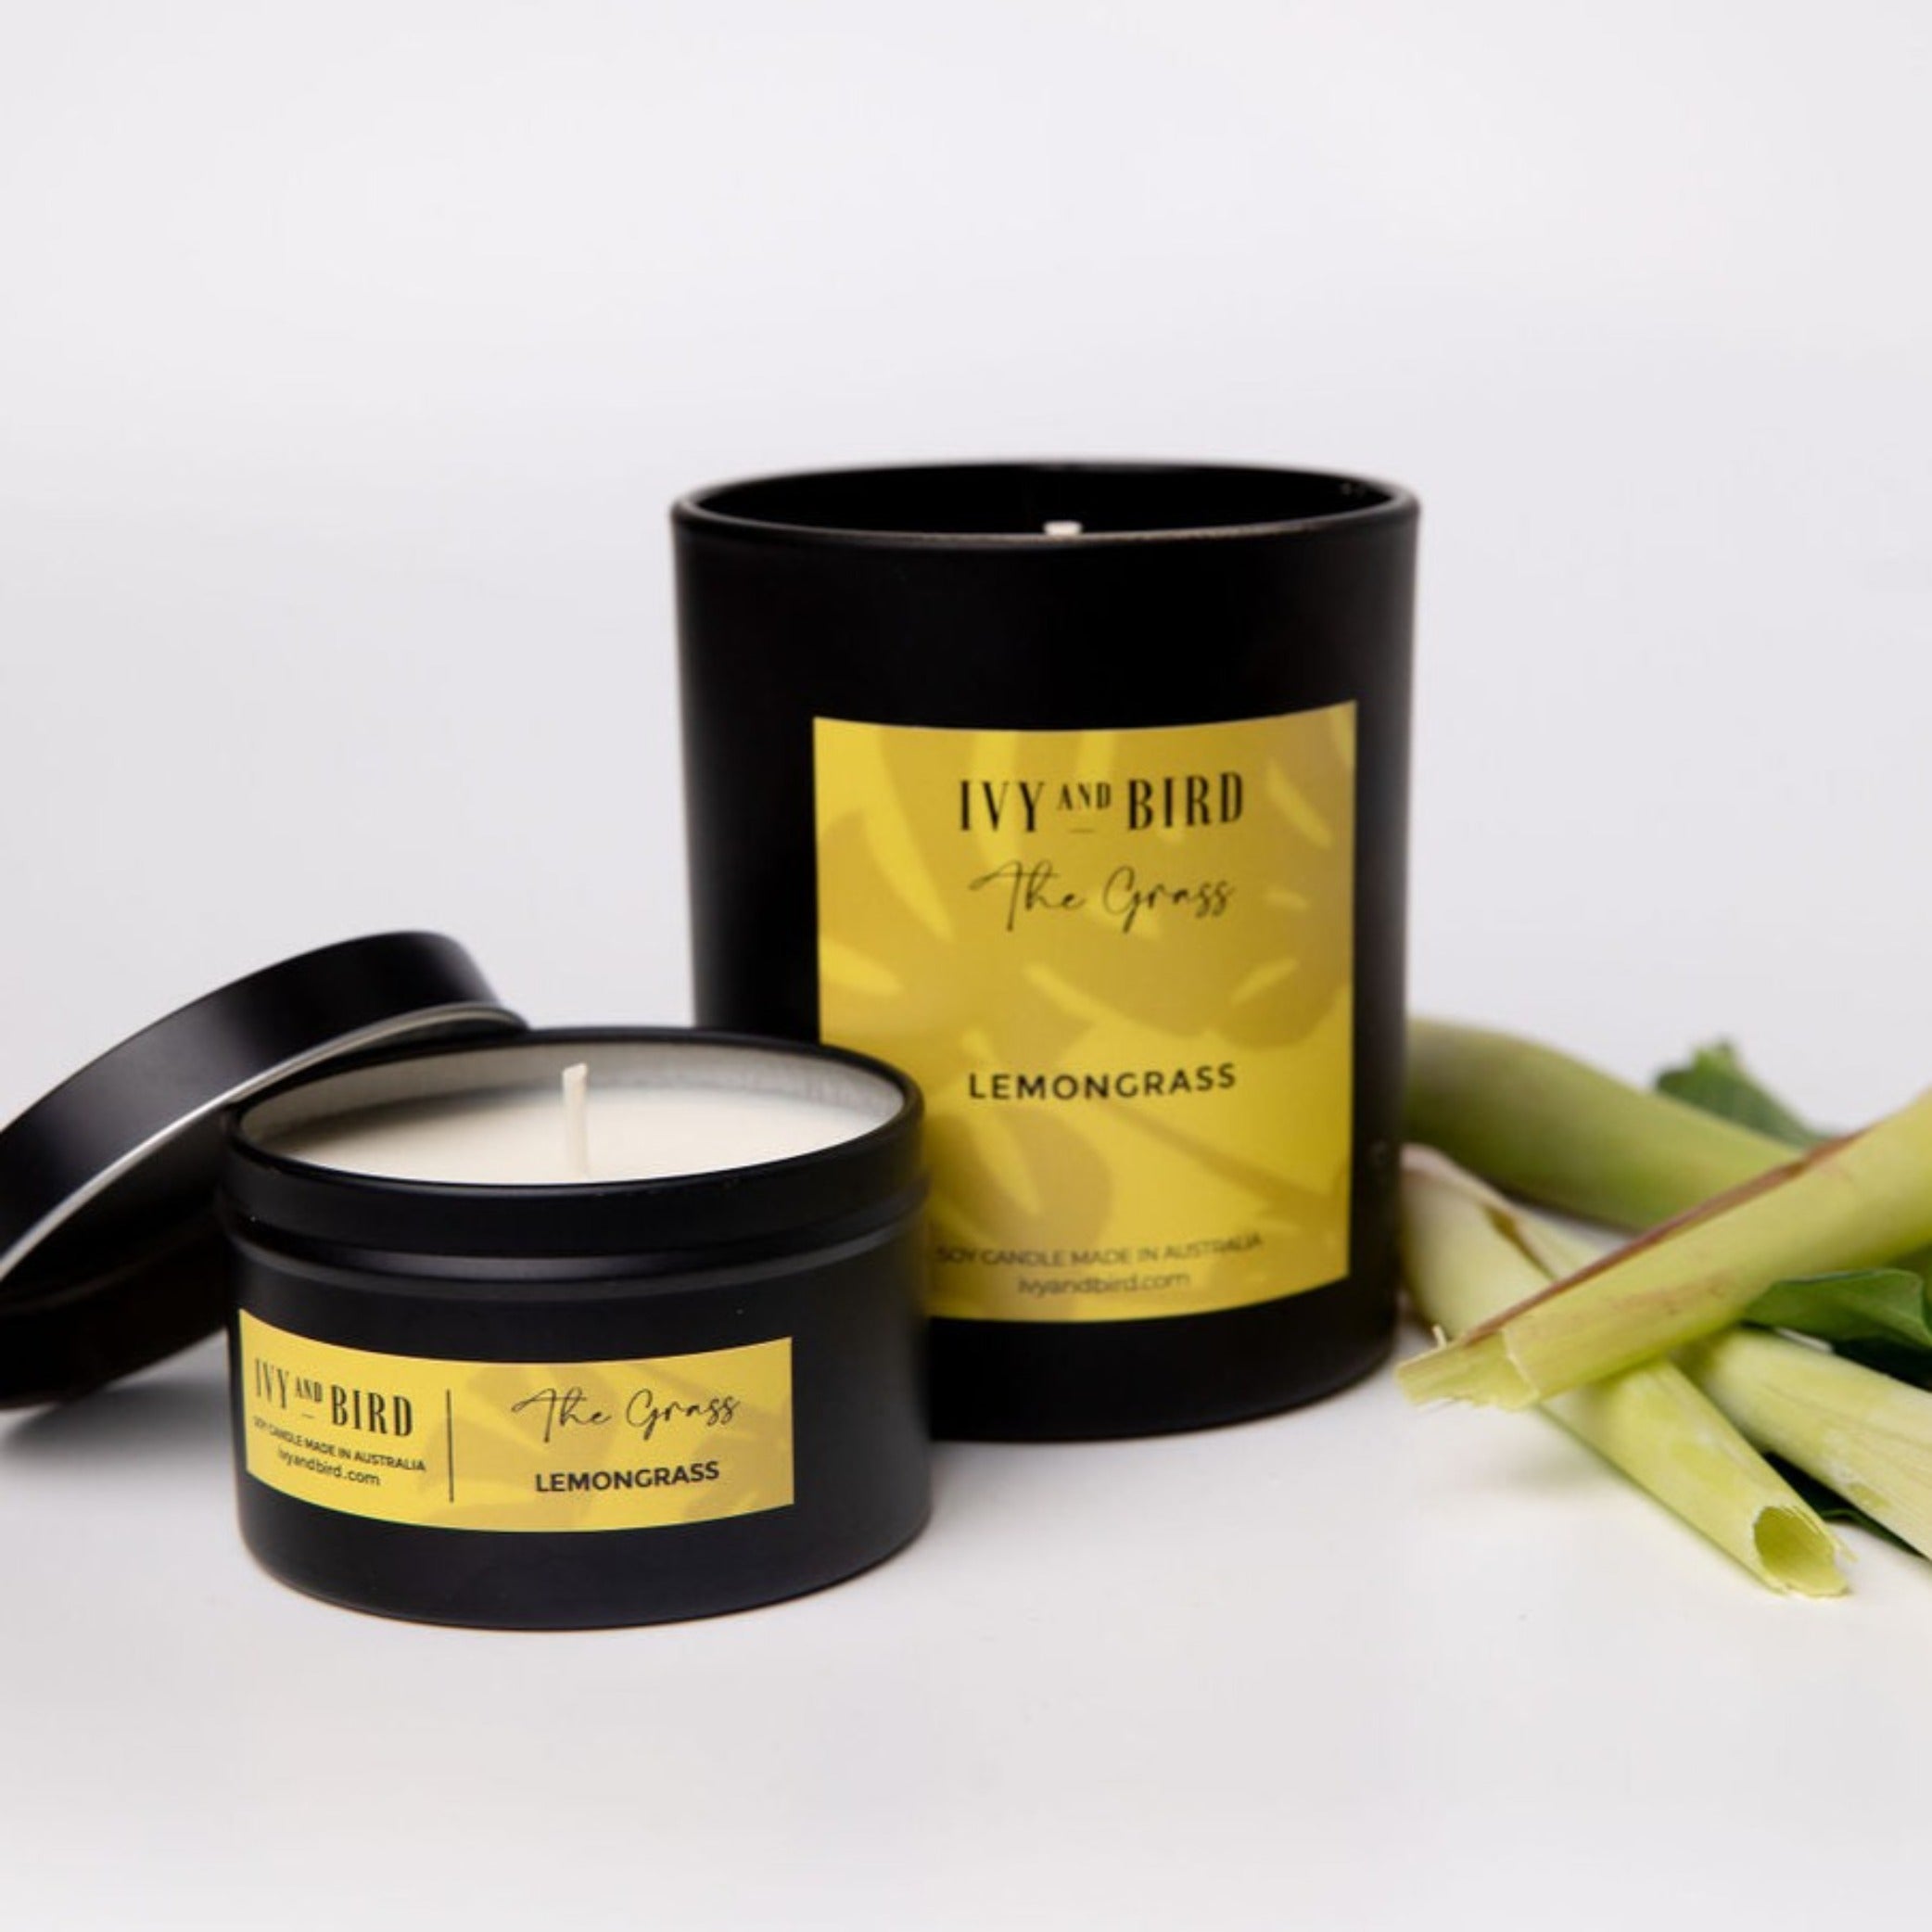 LEMONGRASS SOY CANDLE - THE GRASS